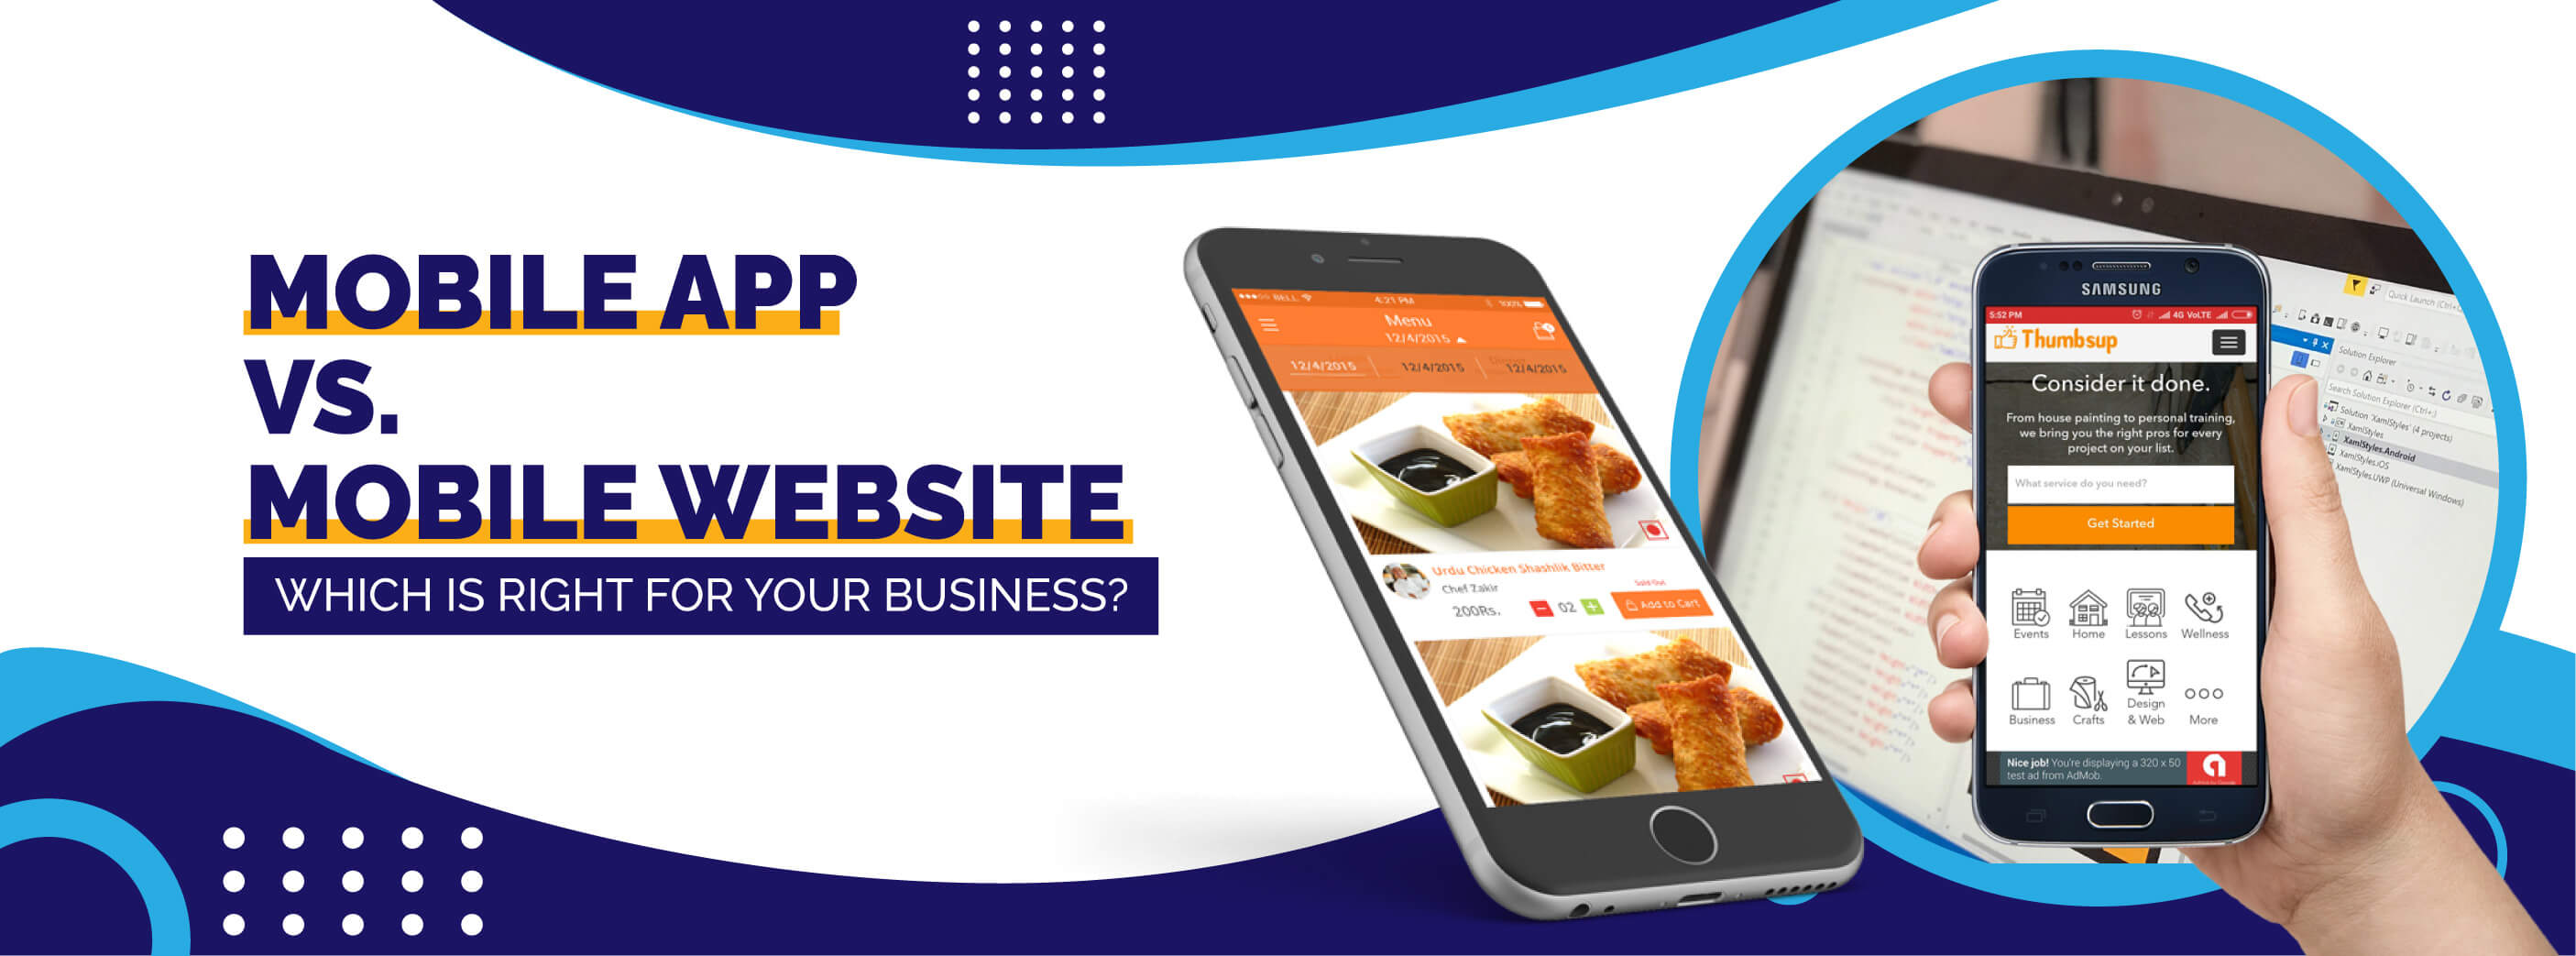 Mobile App Vs. Mobile Website: Which Is Right For Your Business?